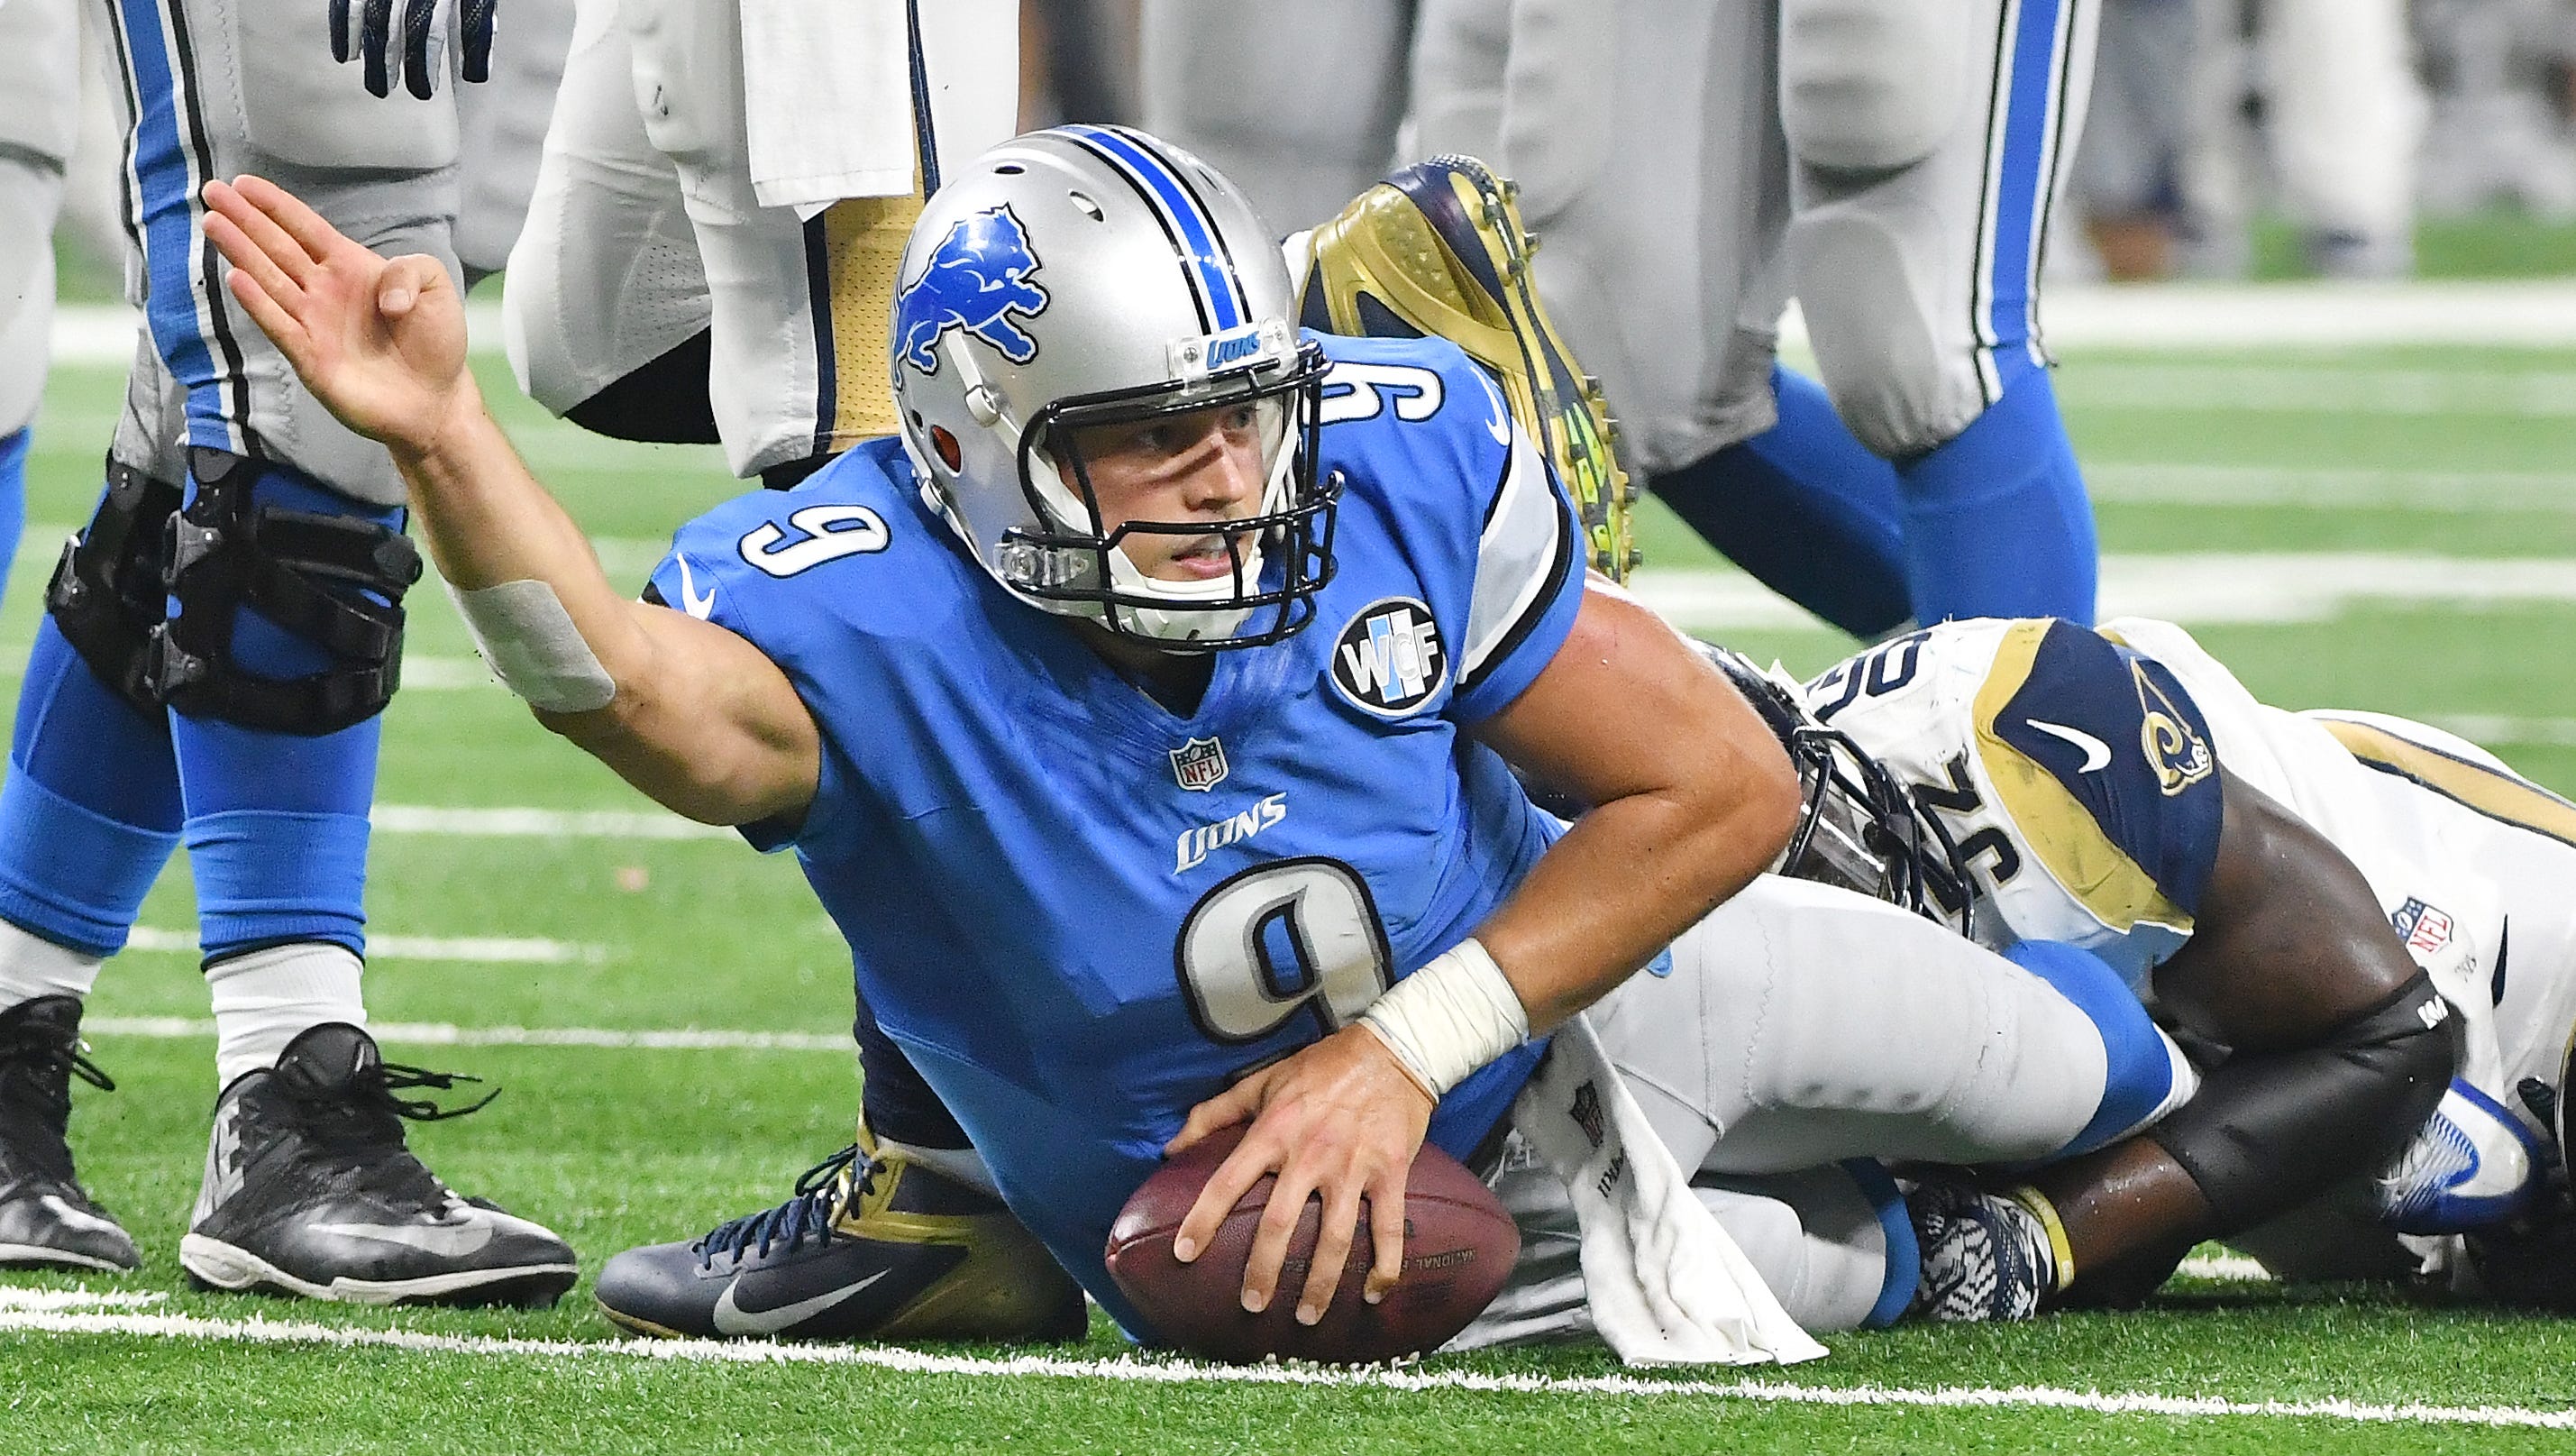 Lions quarterback Matthew Stafford signals for a first down after taking the ball and running it late in the fourth quarter.